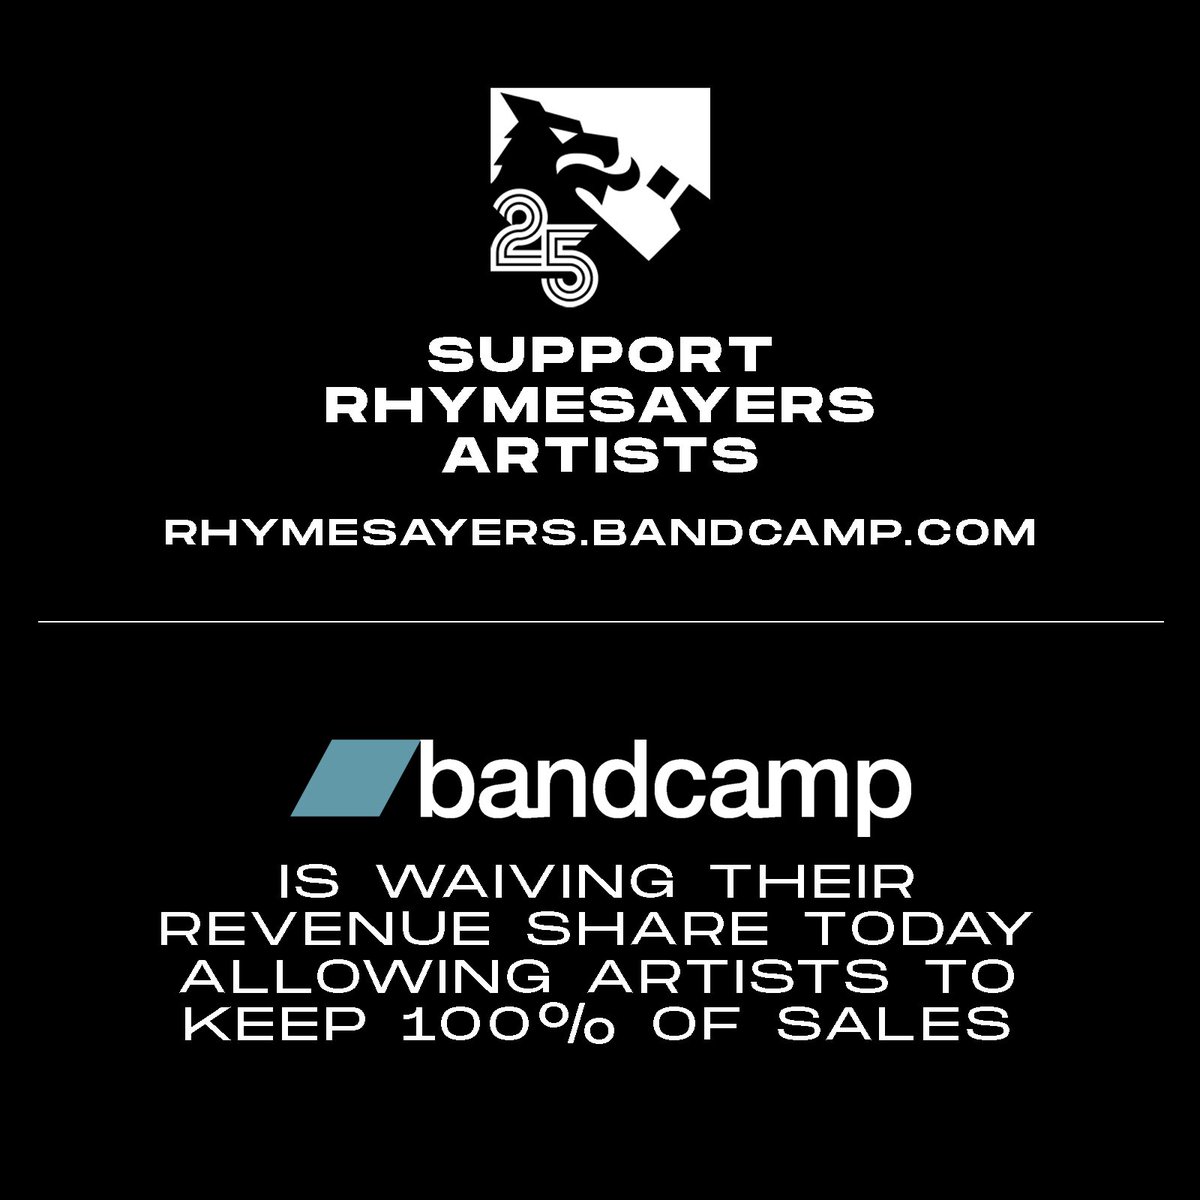 Supporting artists today ❤️ @Bandcamp & @rhymesayers rhymesayers.bandcamp.com